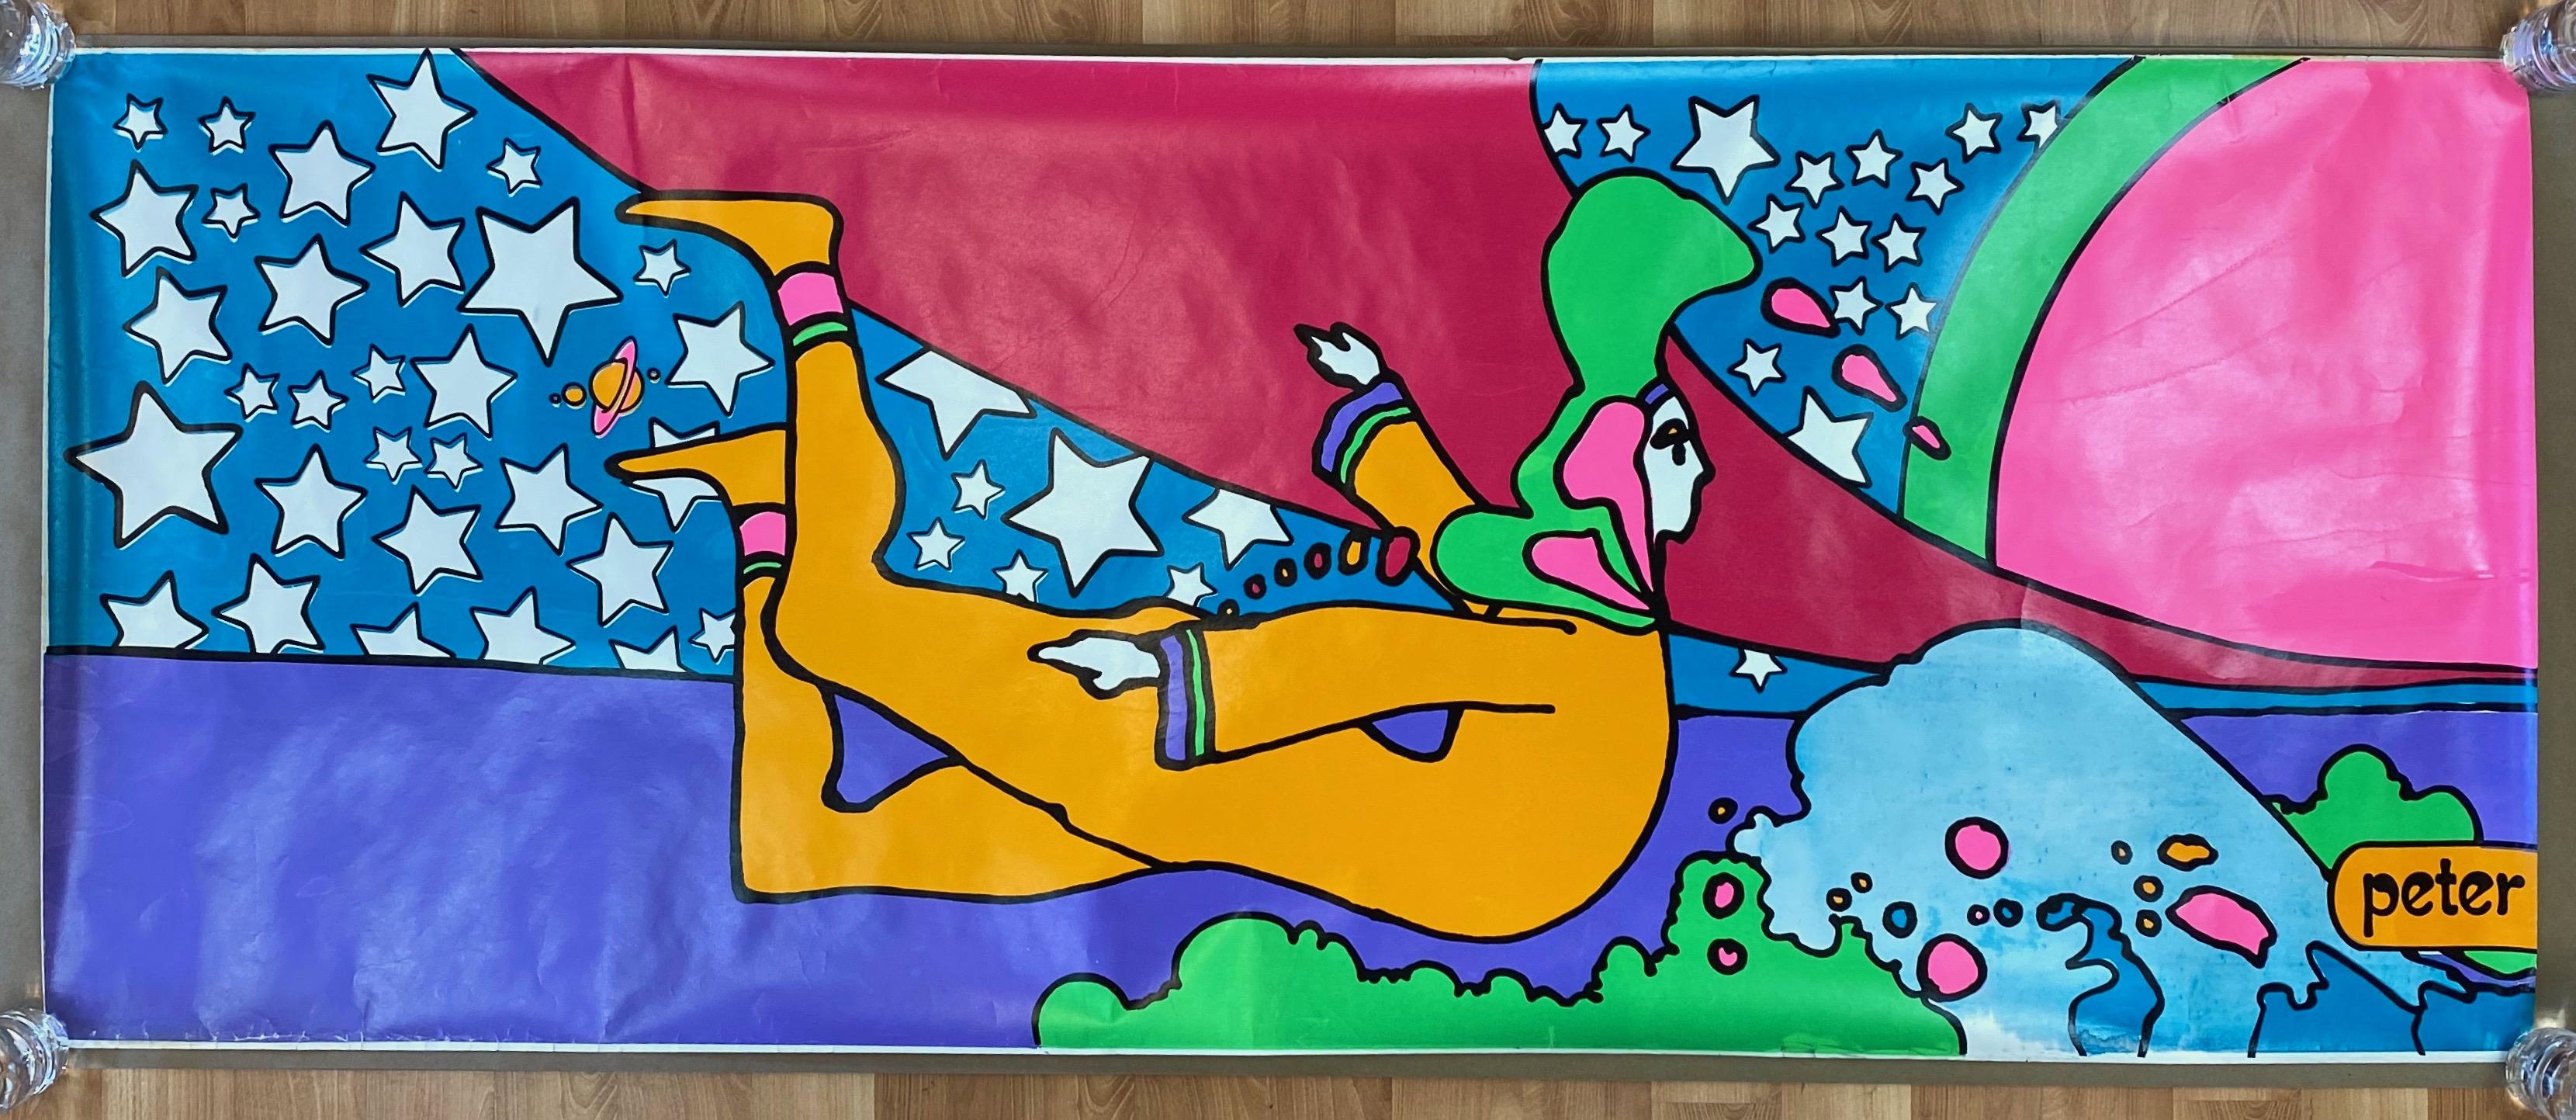 An important, monumental, and exceptionally rare twelve-foot-wide two-piece serigraph created by Peter Max (American, b. Germany, 1937) for his 1970 “The World of Peter Max” first solo museum exhibition tour.

Features the artist’s iconic “Cosmic